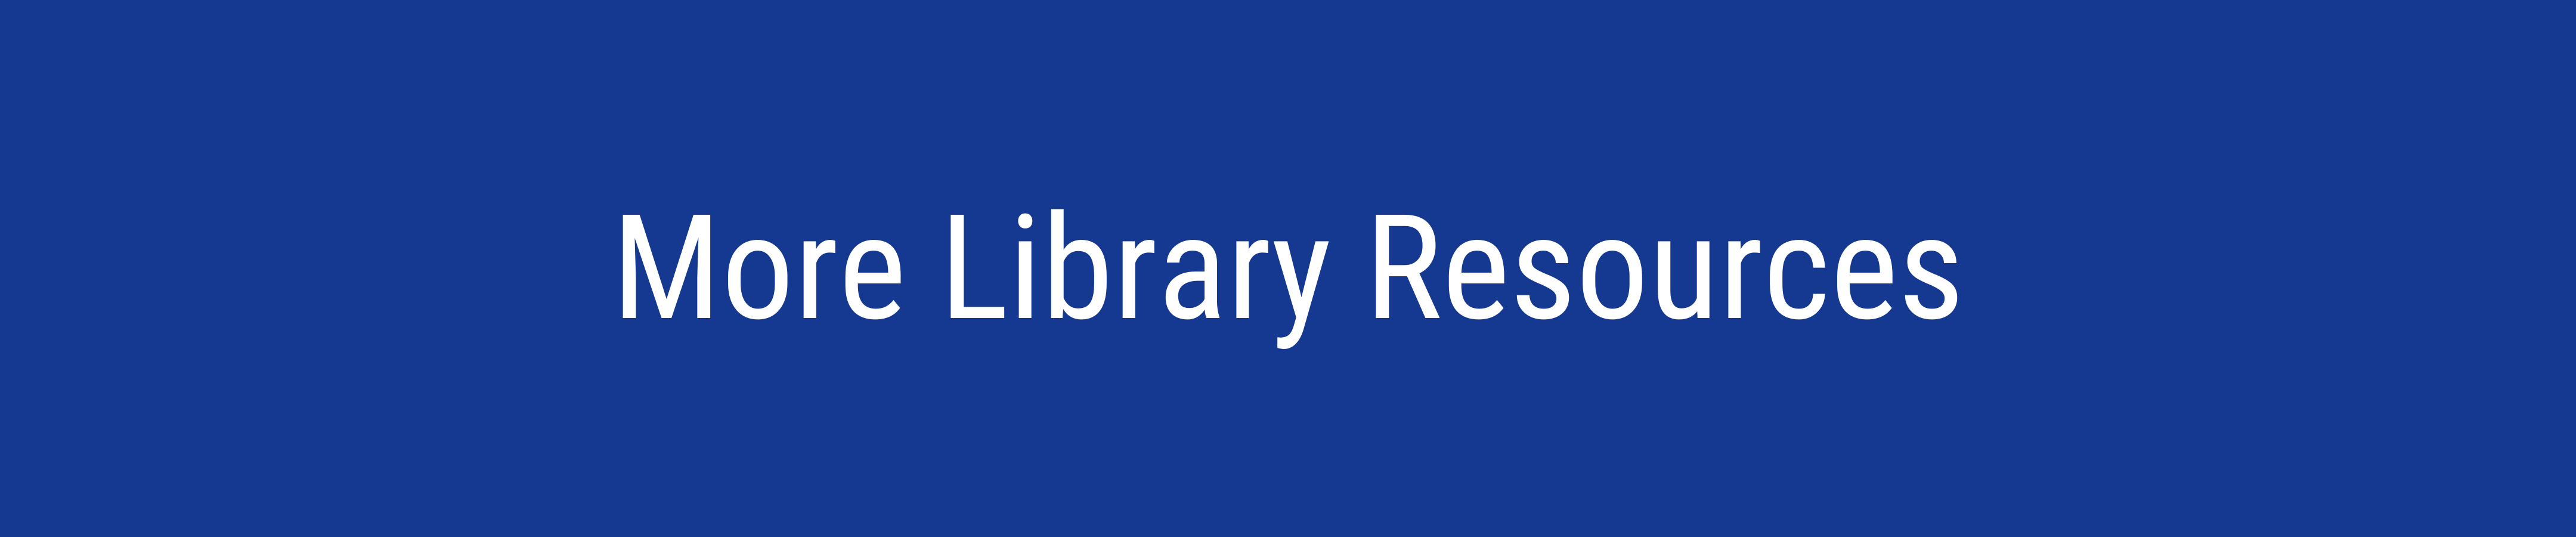 More Library Resources